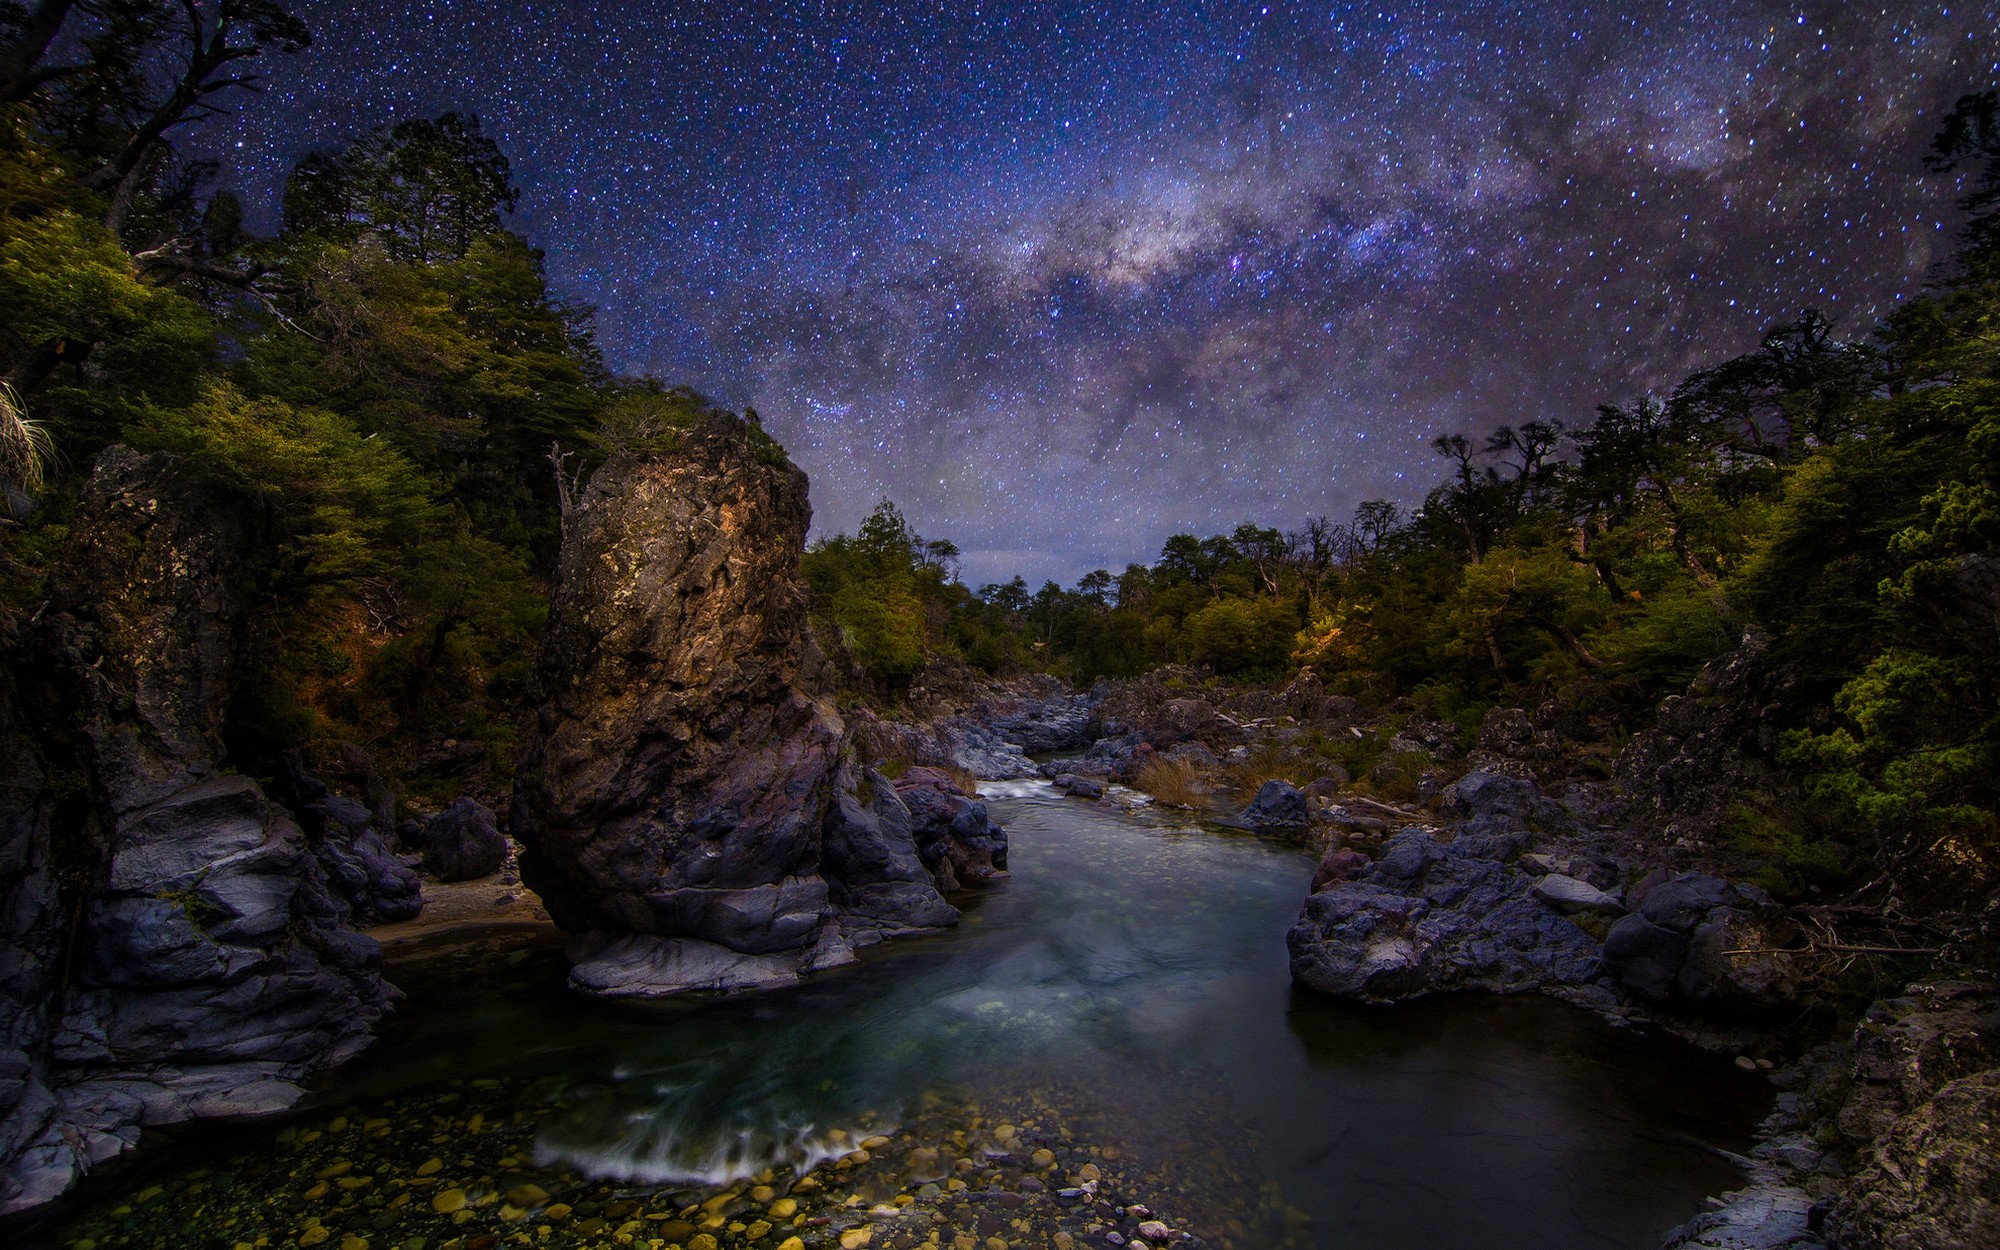 General 2000x1250 nature landscape The Devil's Throat river canyon trees shrubs starry night Milky Way galaxy Chile long exposure South America